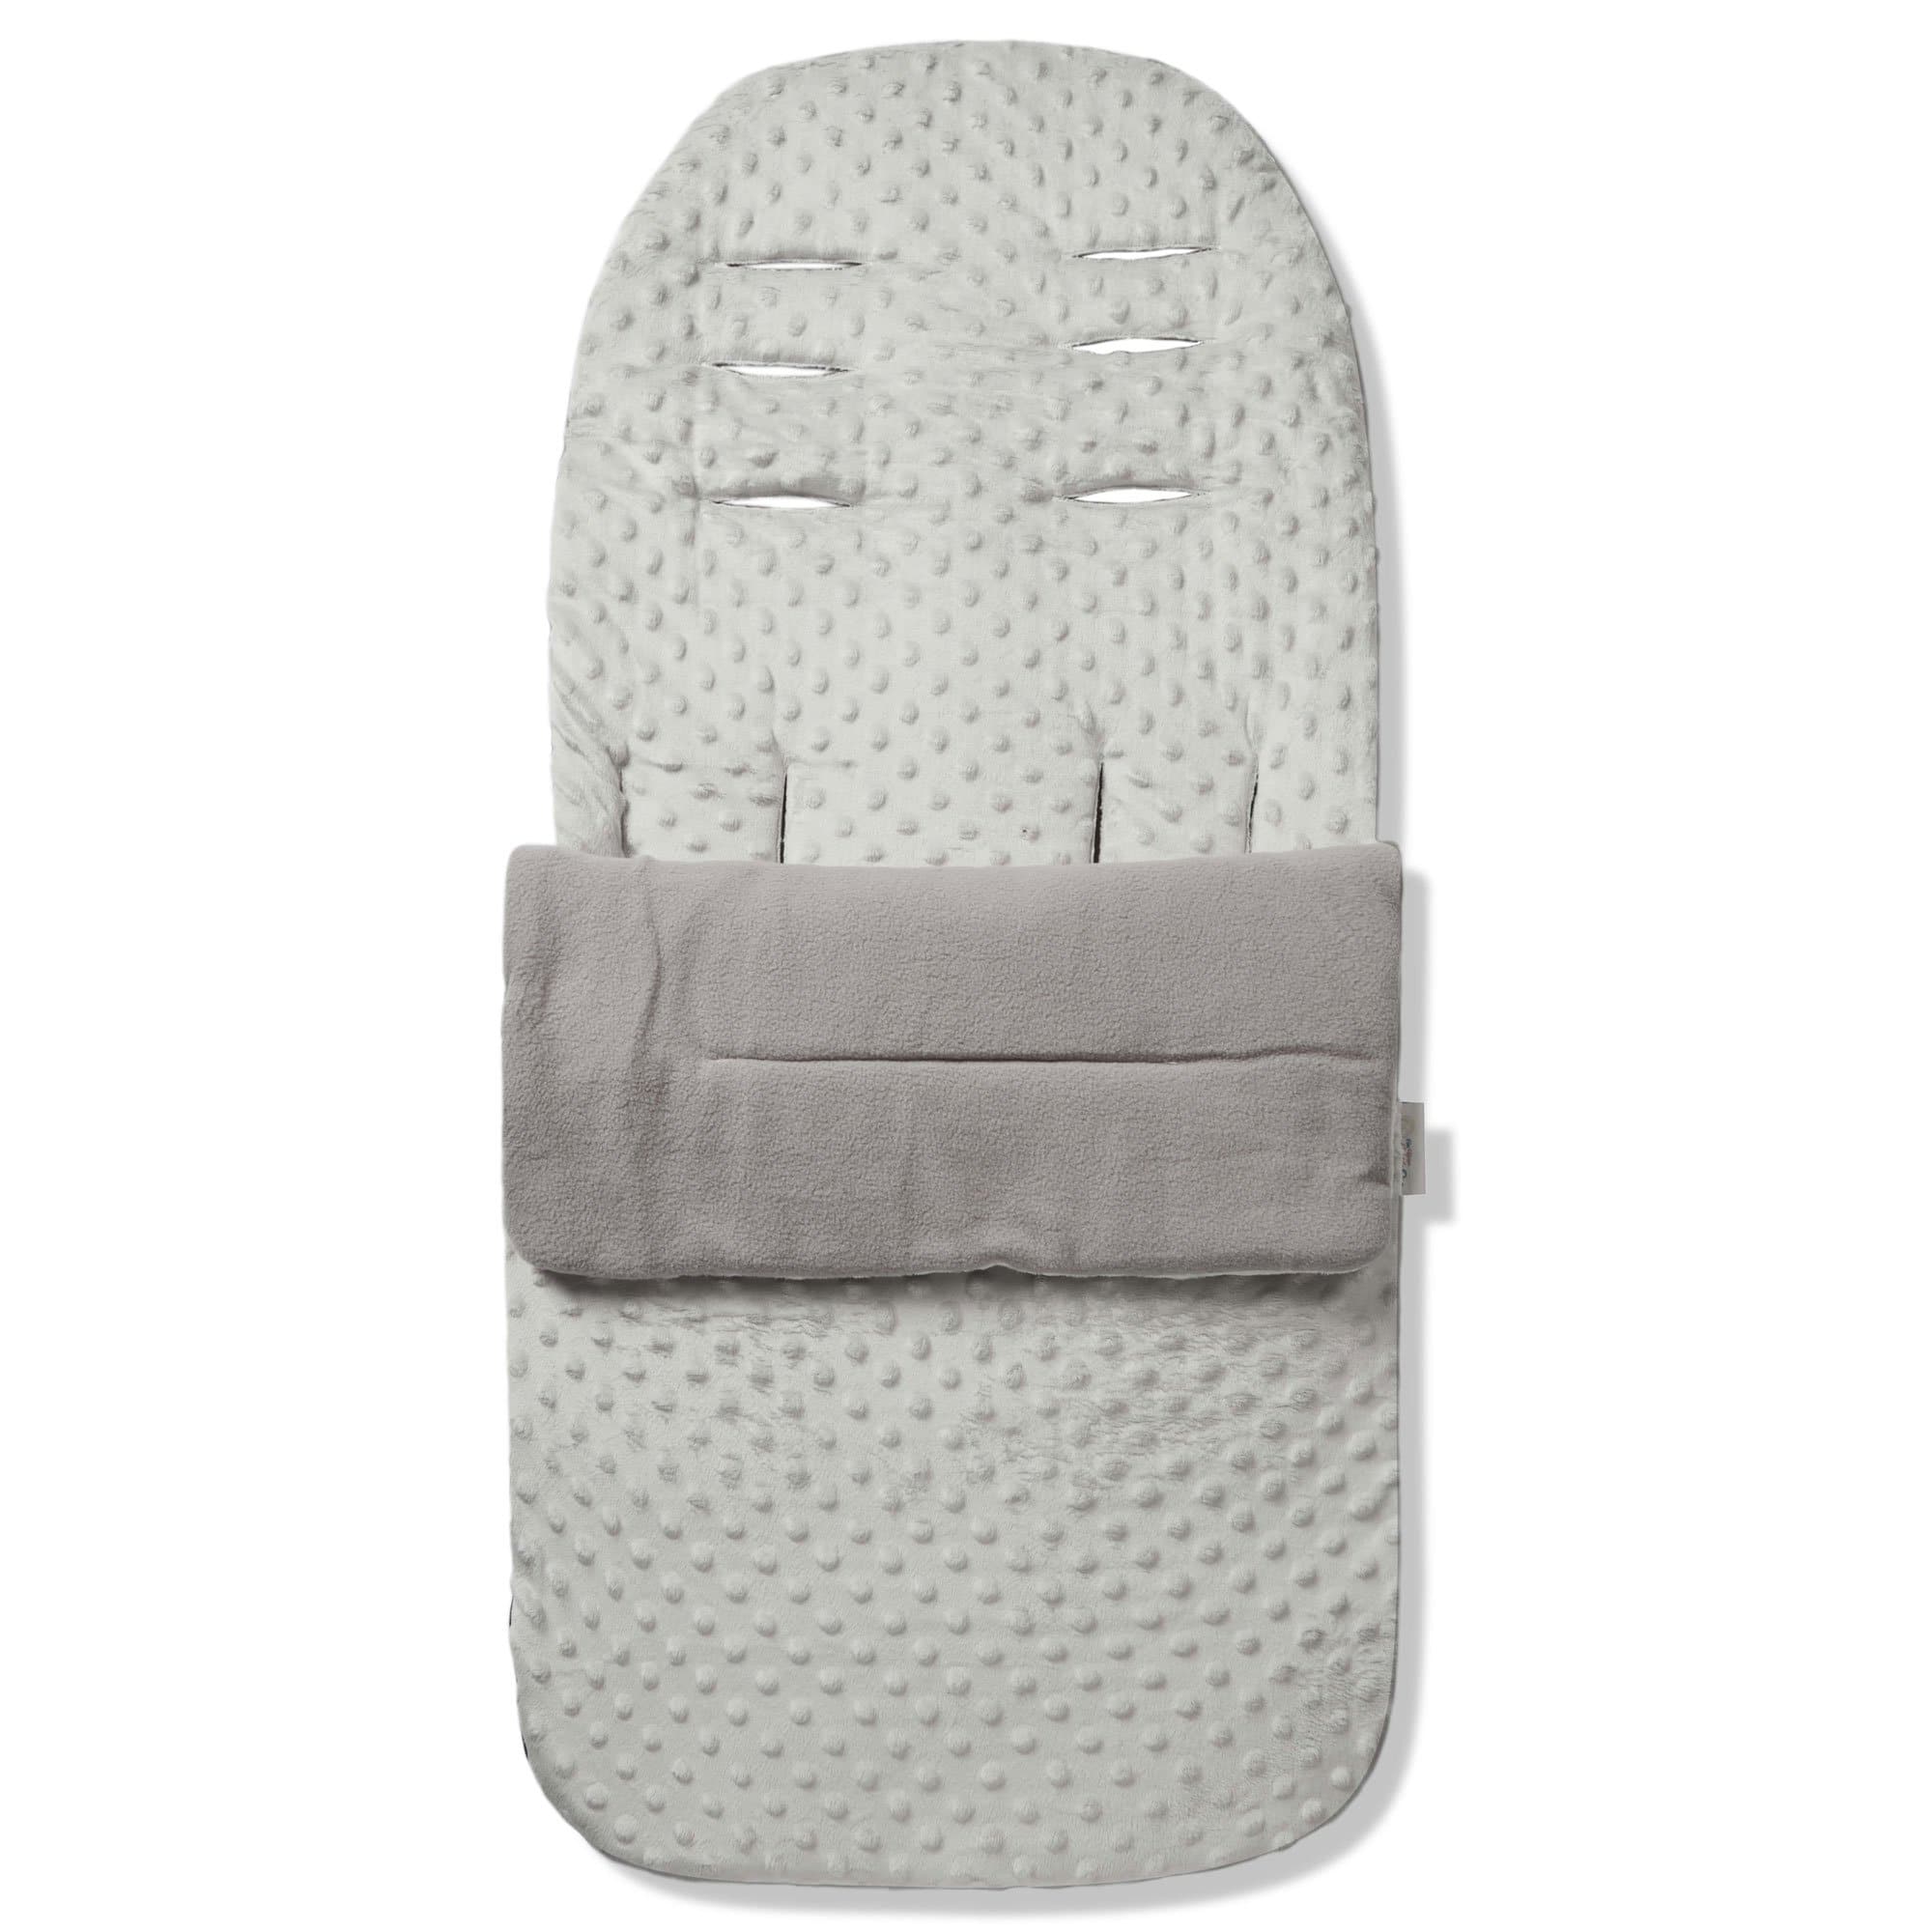 Dimple Footmuff / Cosy Toes Compatible with Baby Trend - Grey / Fits All Models | For Your Little One